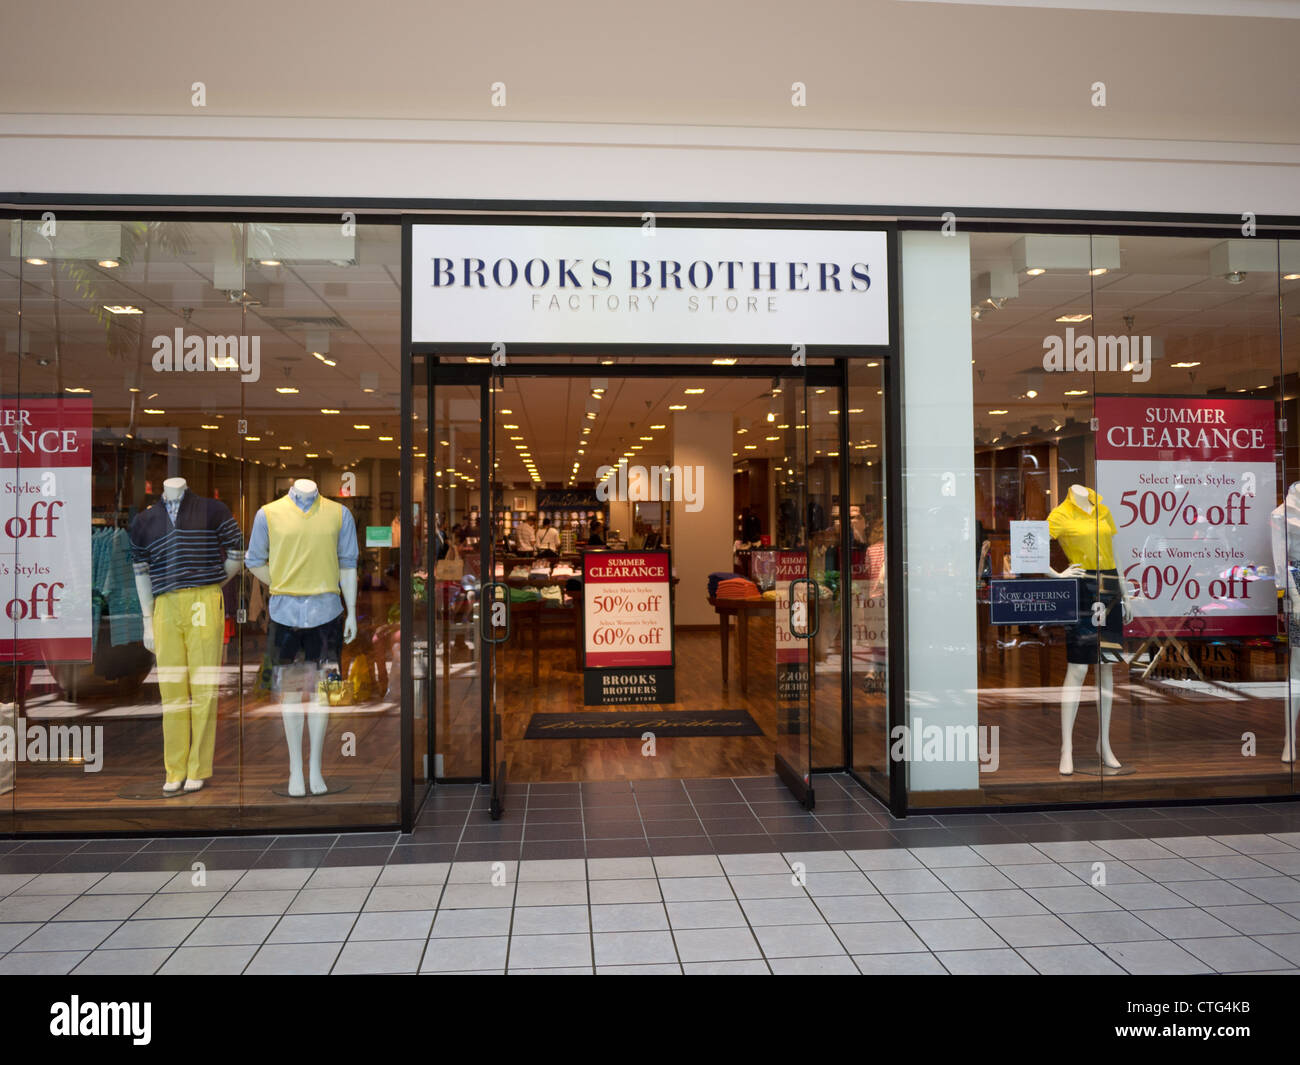 brooks brother factory outlet